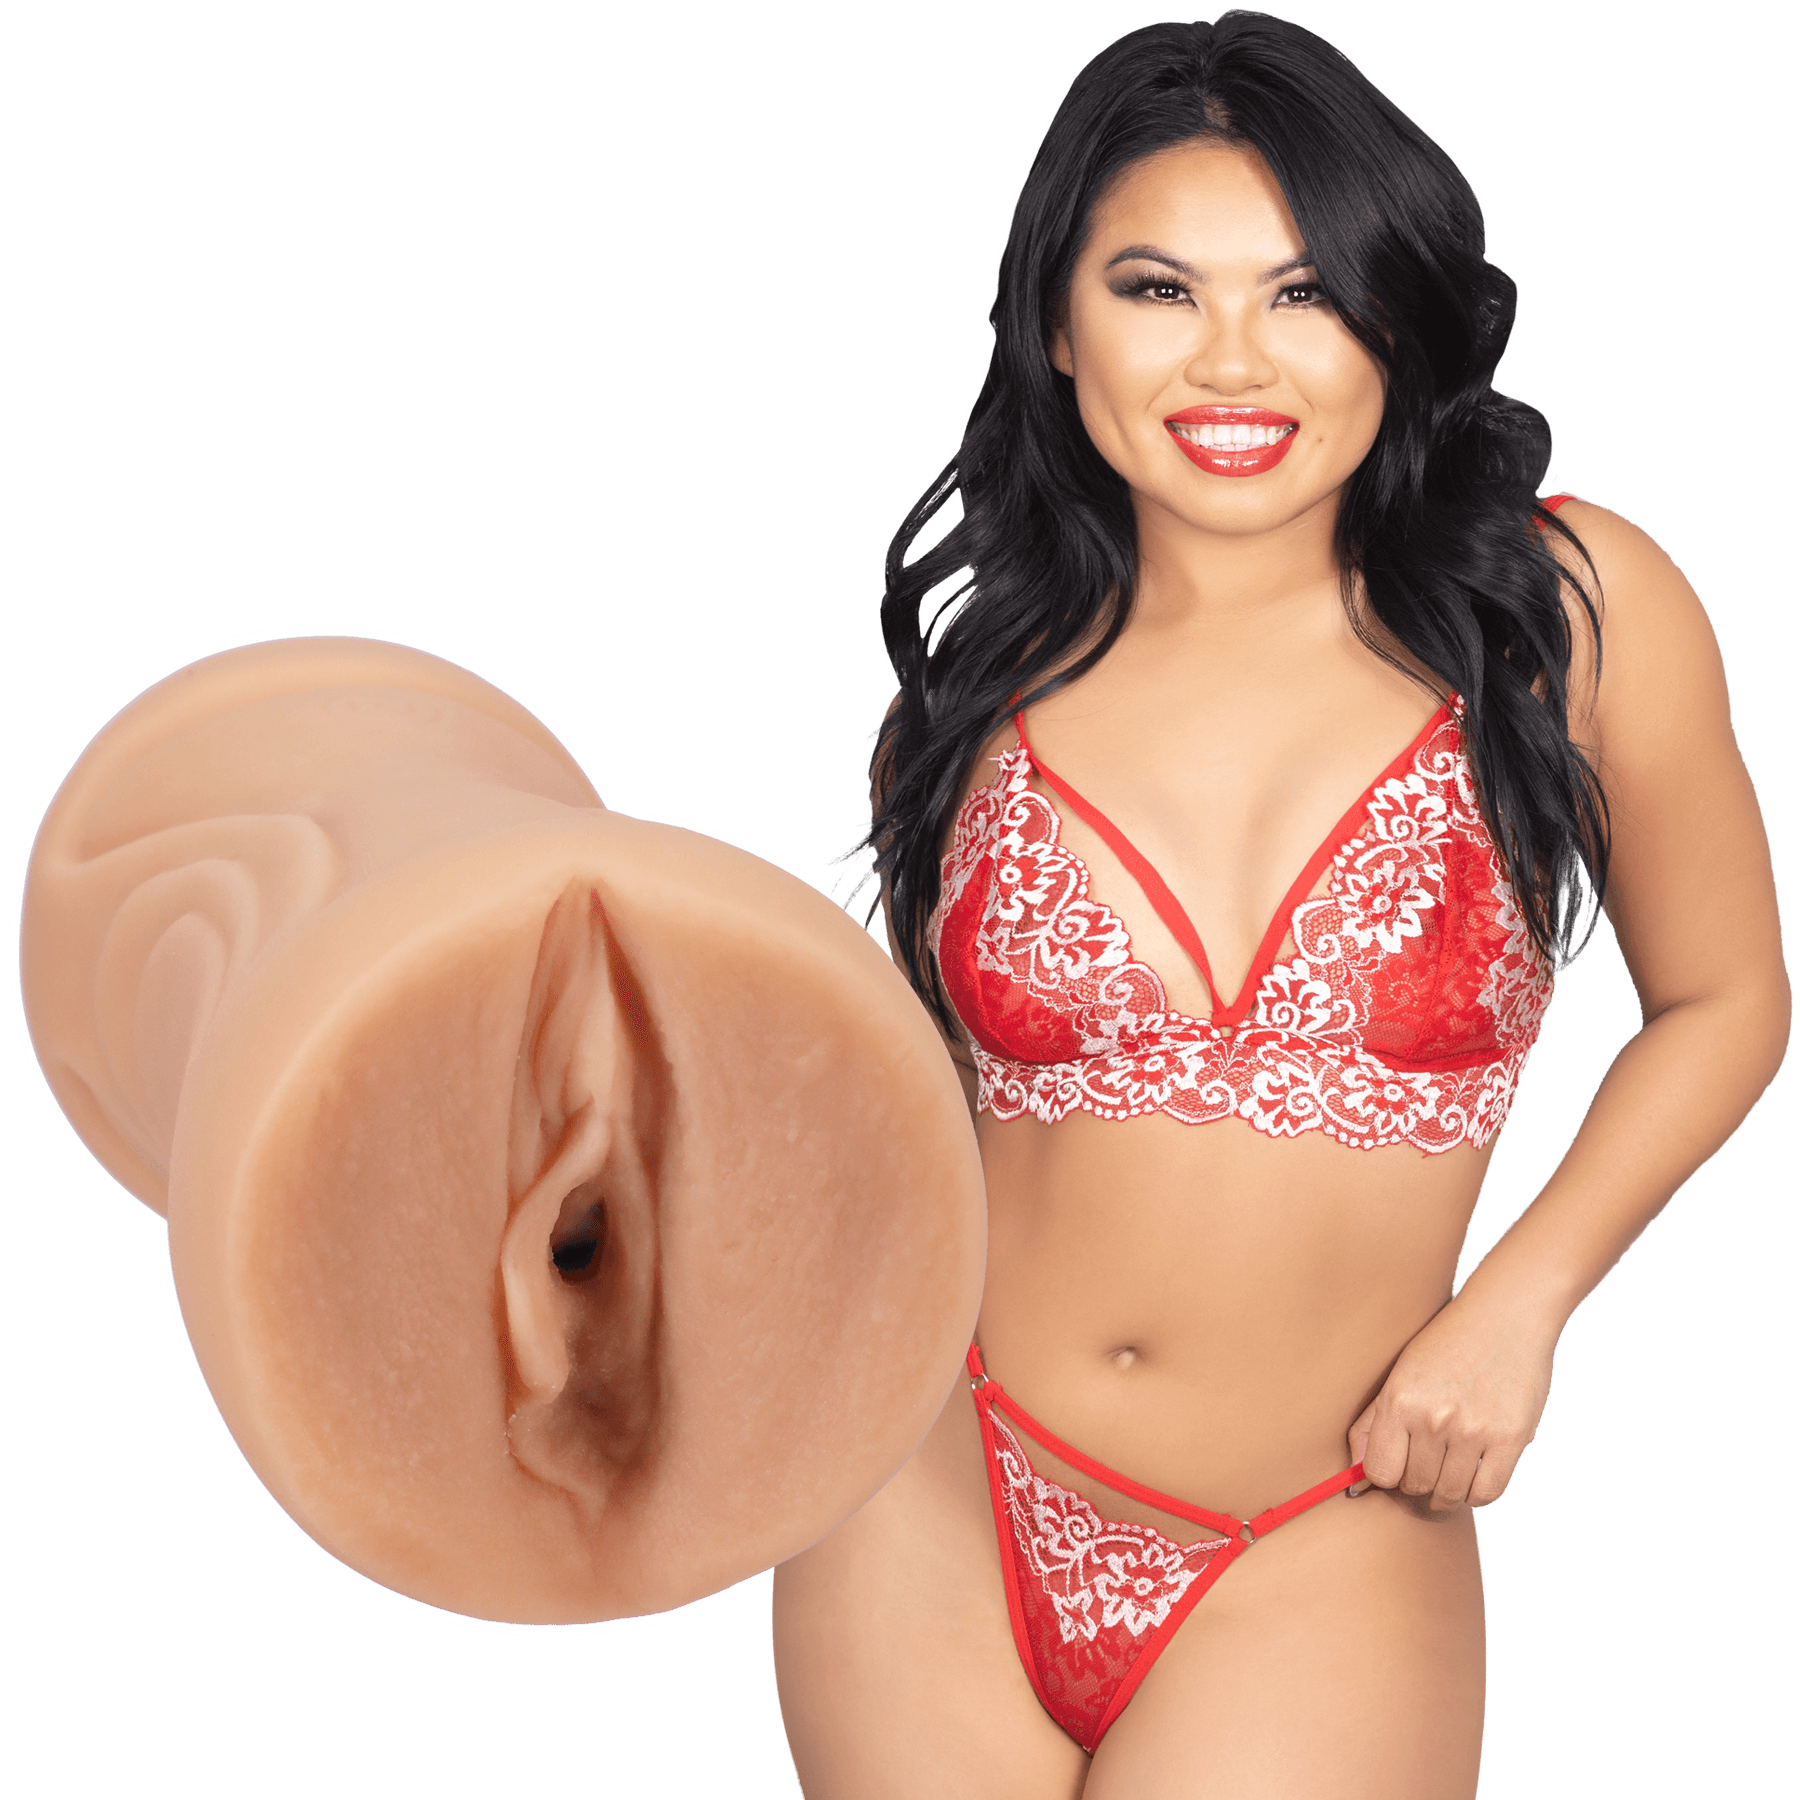 Doc Johnson Cindy Starfall Stroker - Buy At Luxury Toy X - Free 3-Day Shipping